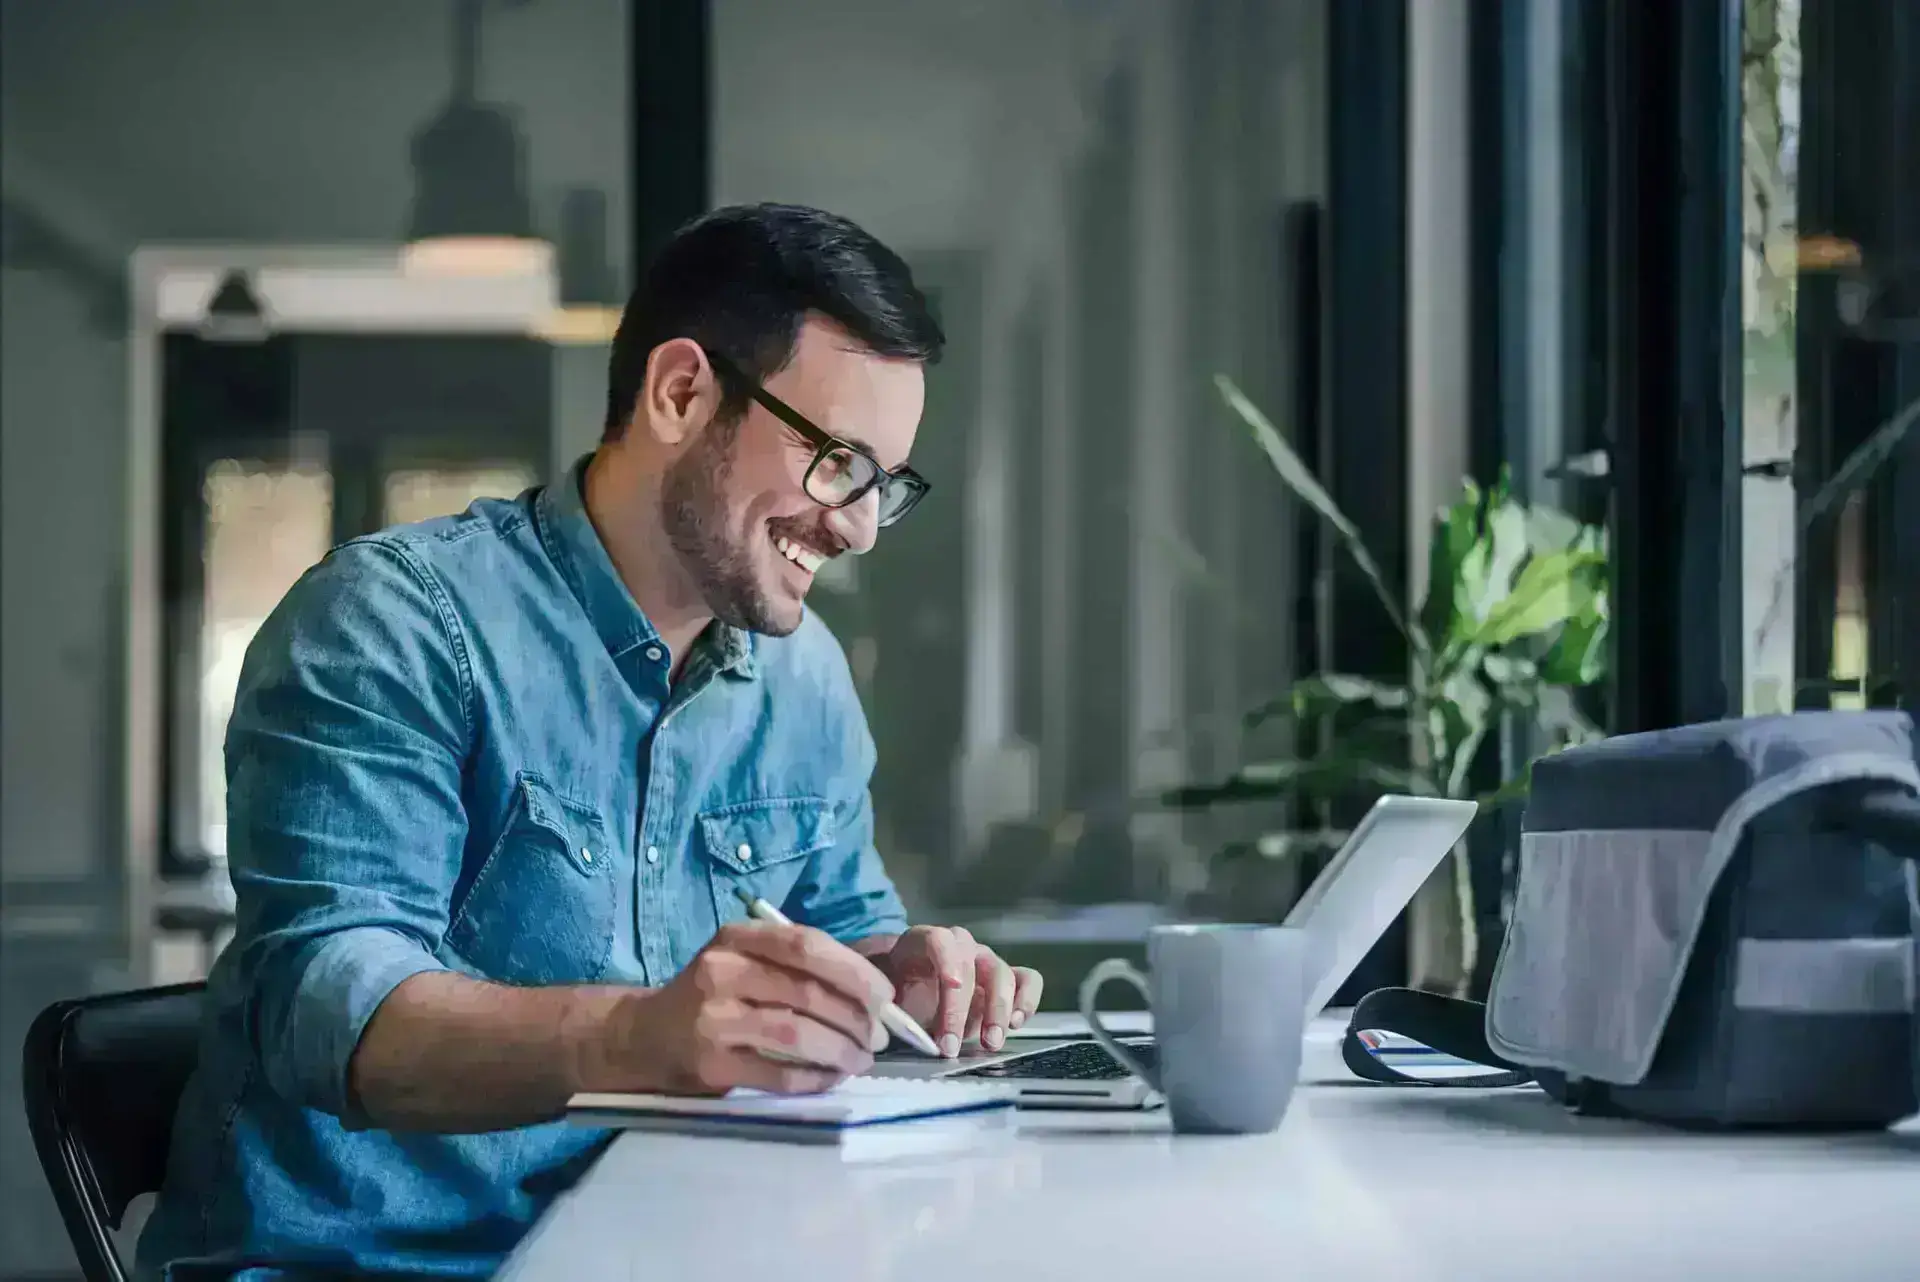 Man smiling at laptop screen while writing in notebook